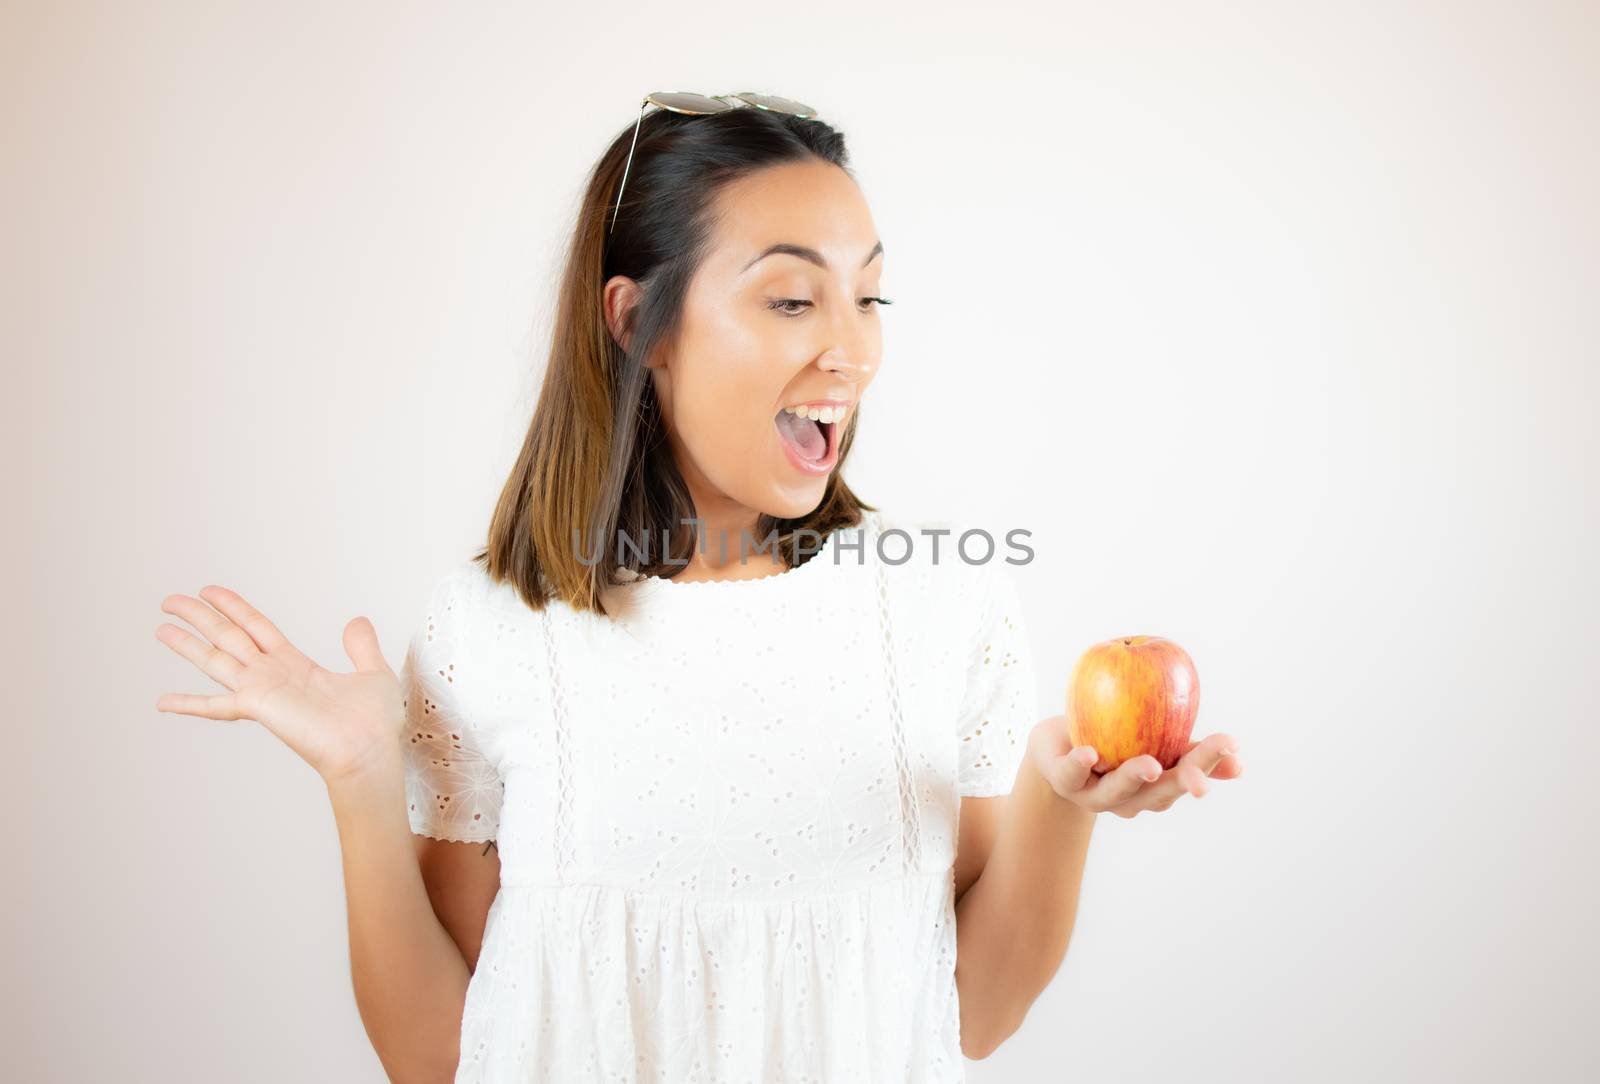 Beautiful young woman picking up an apple